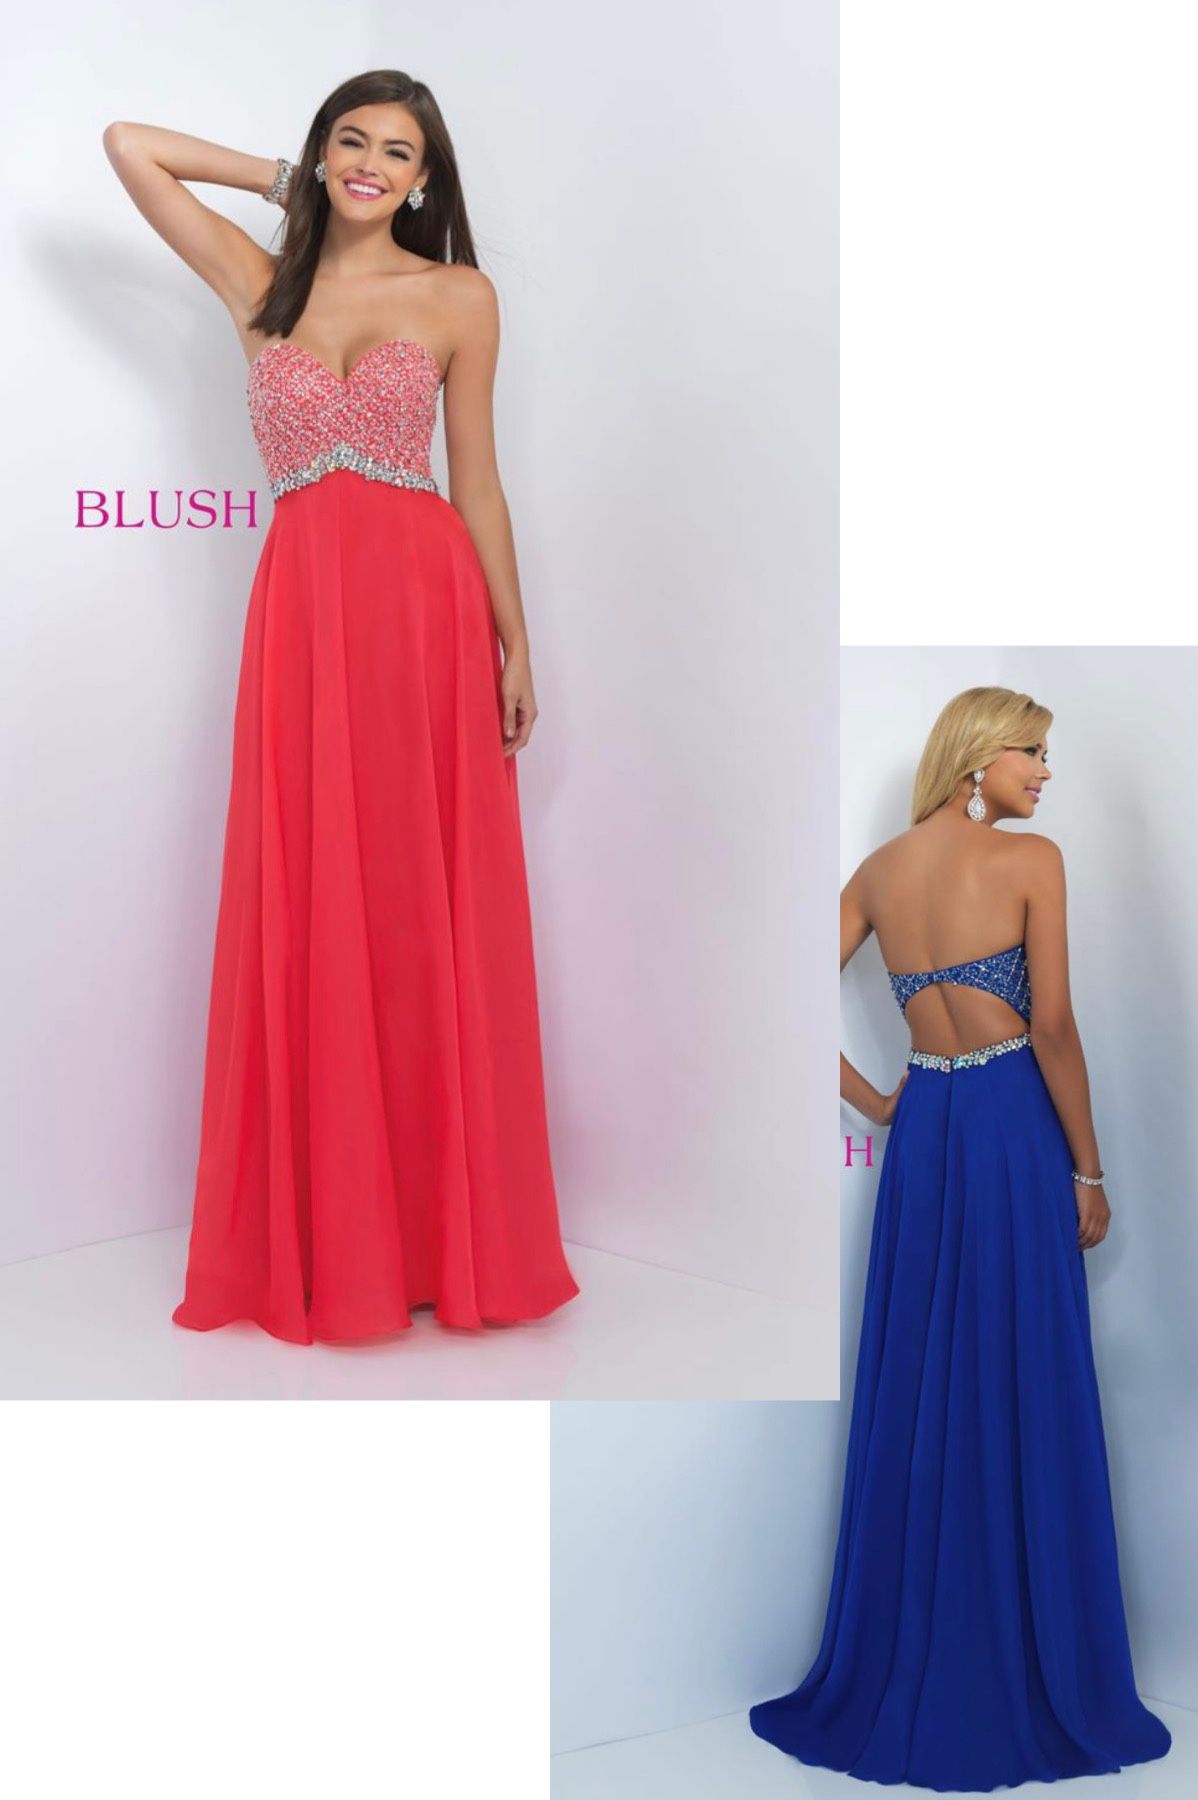 New With Tags Blush Prom Size 2 Prom Dress & Formal Dress $99